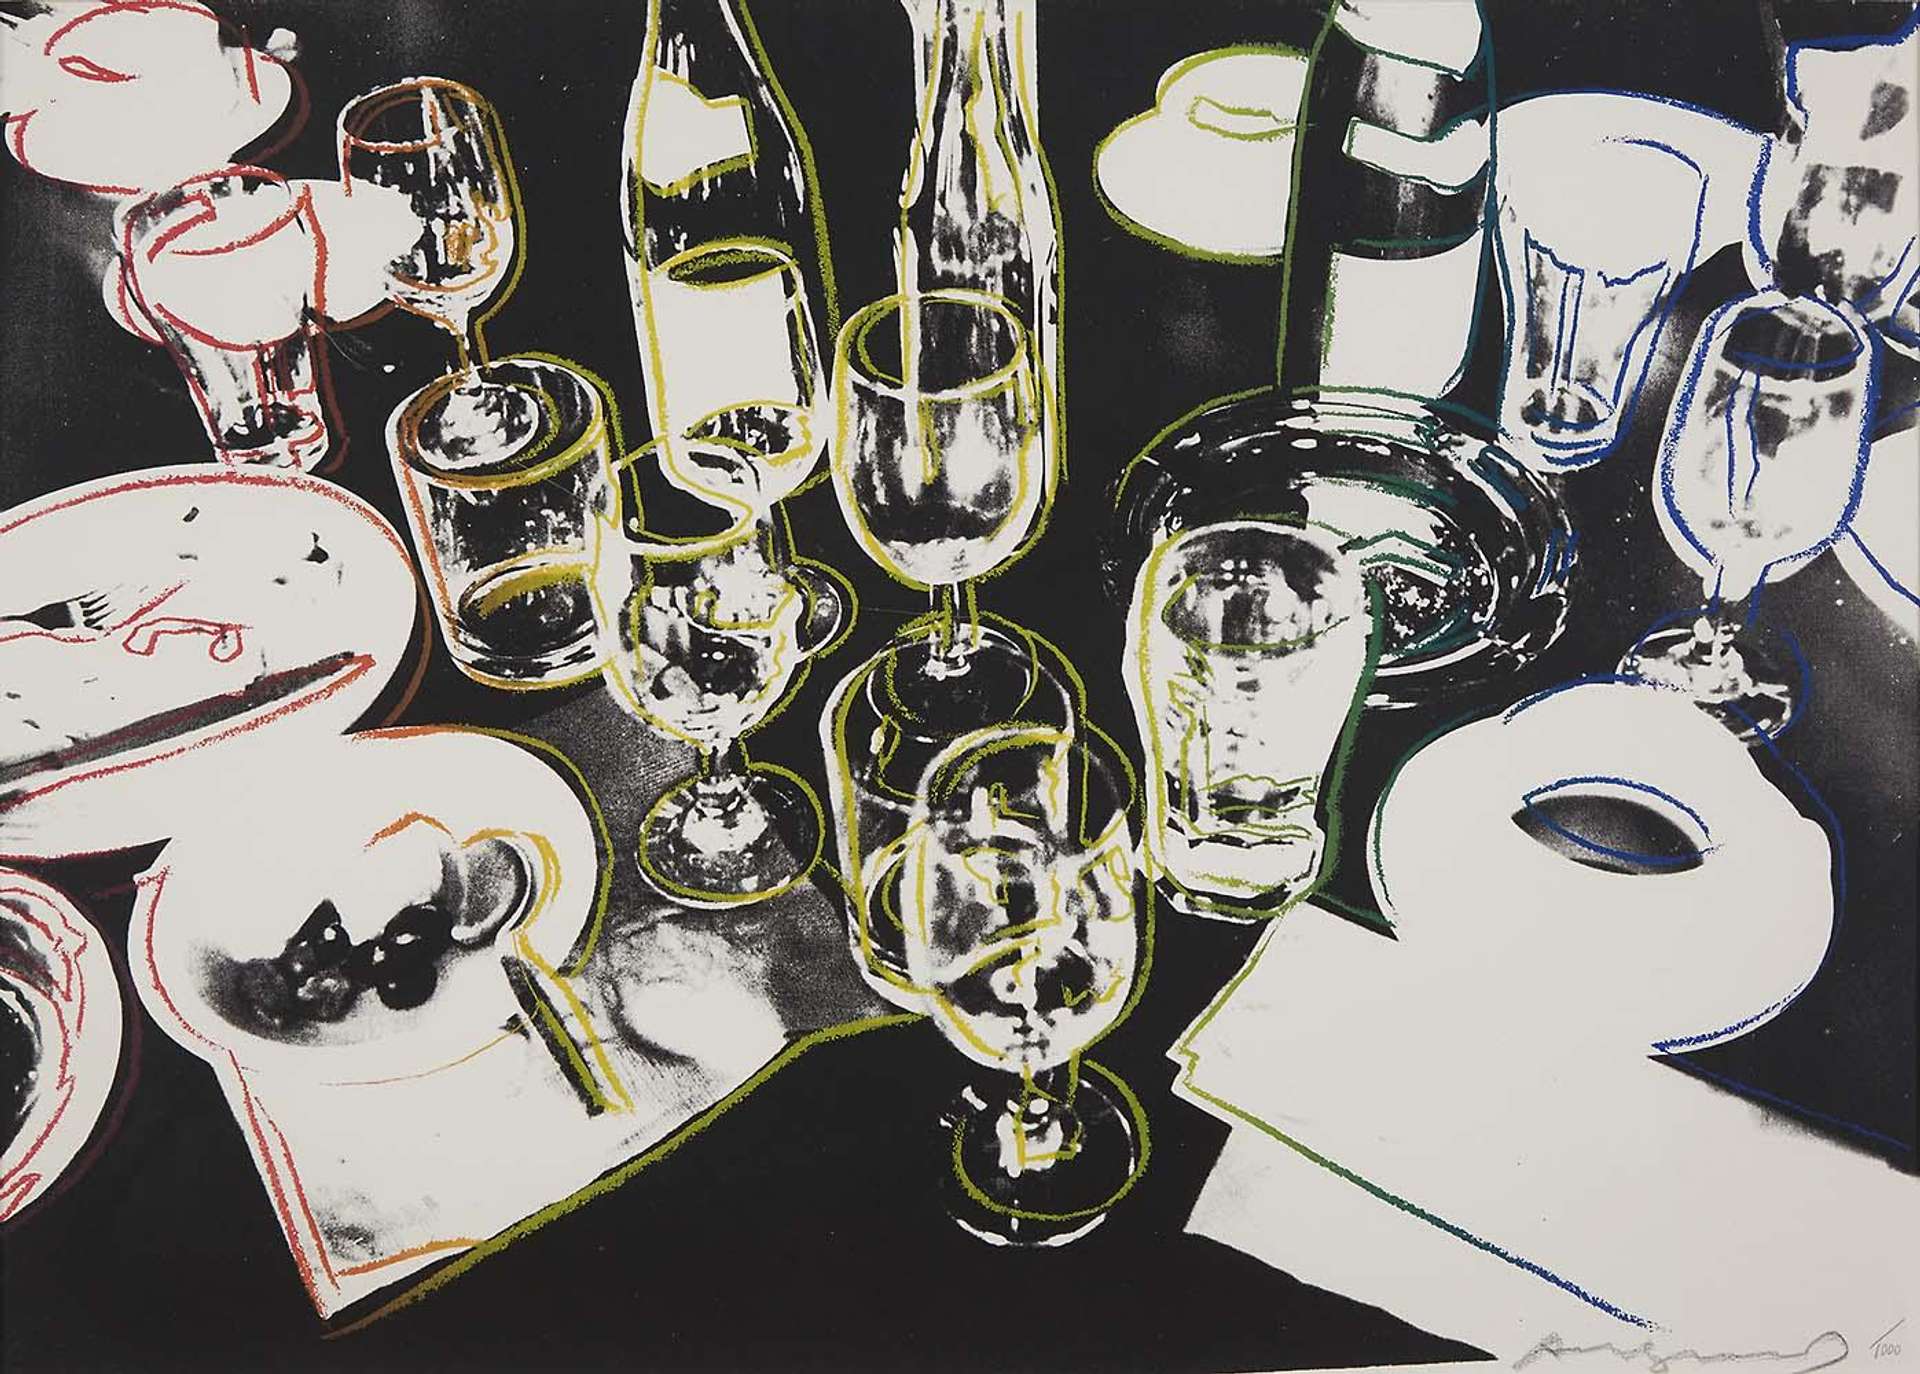 After the Party (F&S 11.183) by Andy Warhol